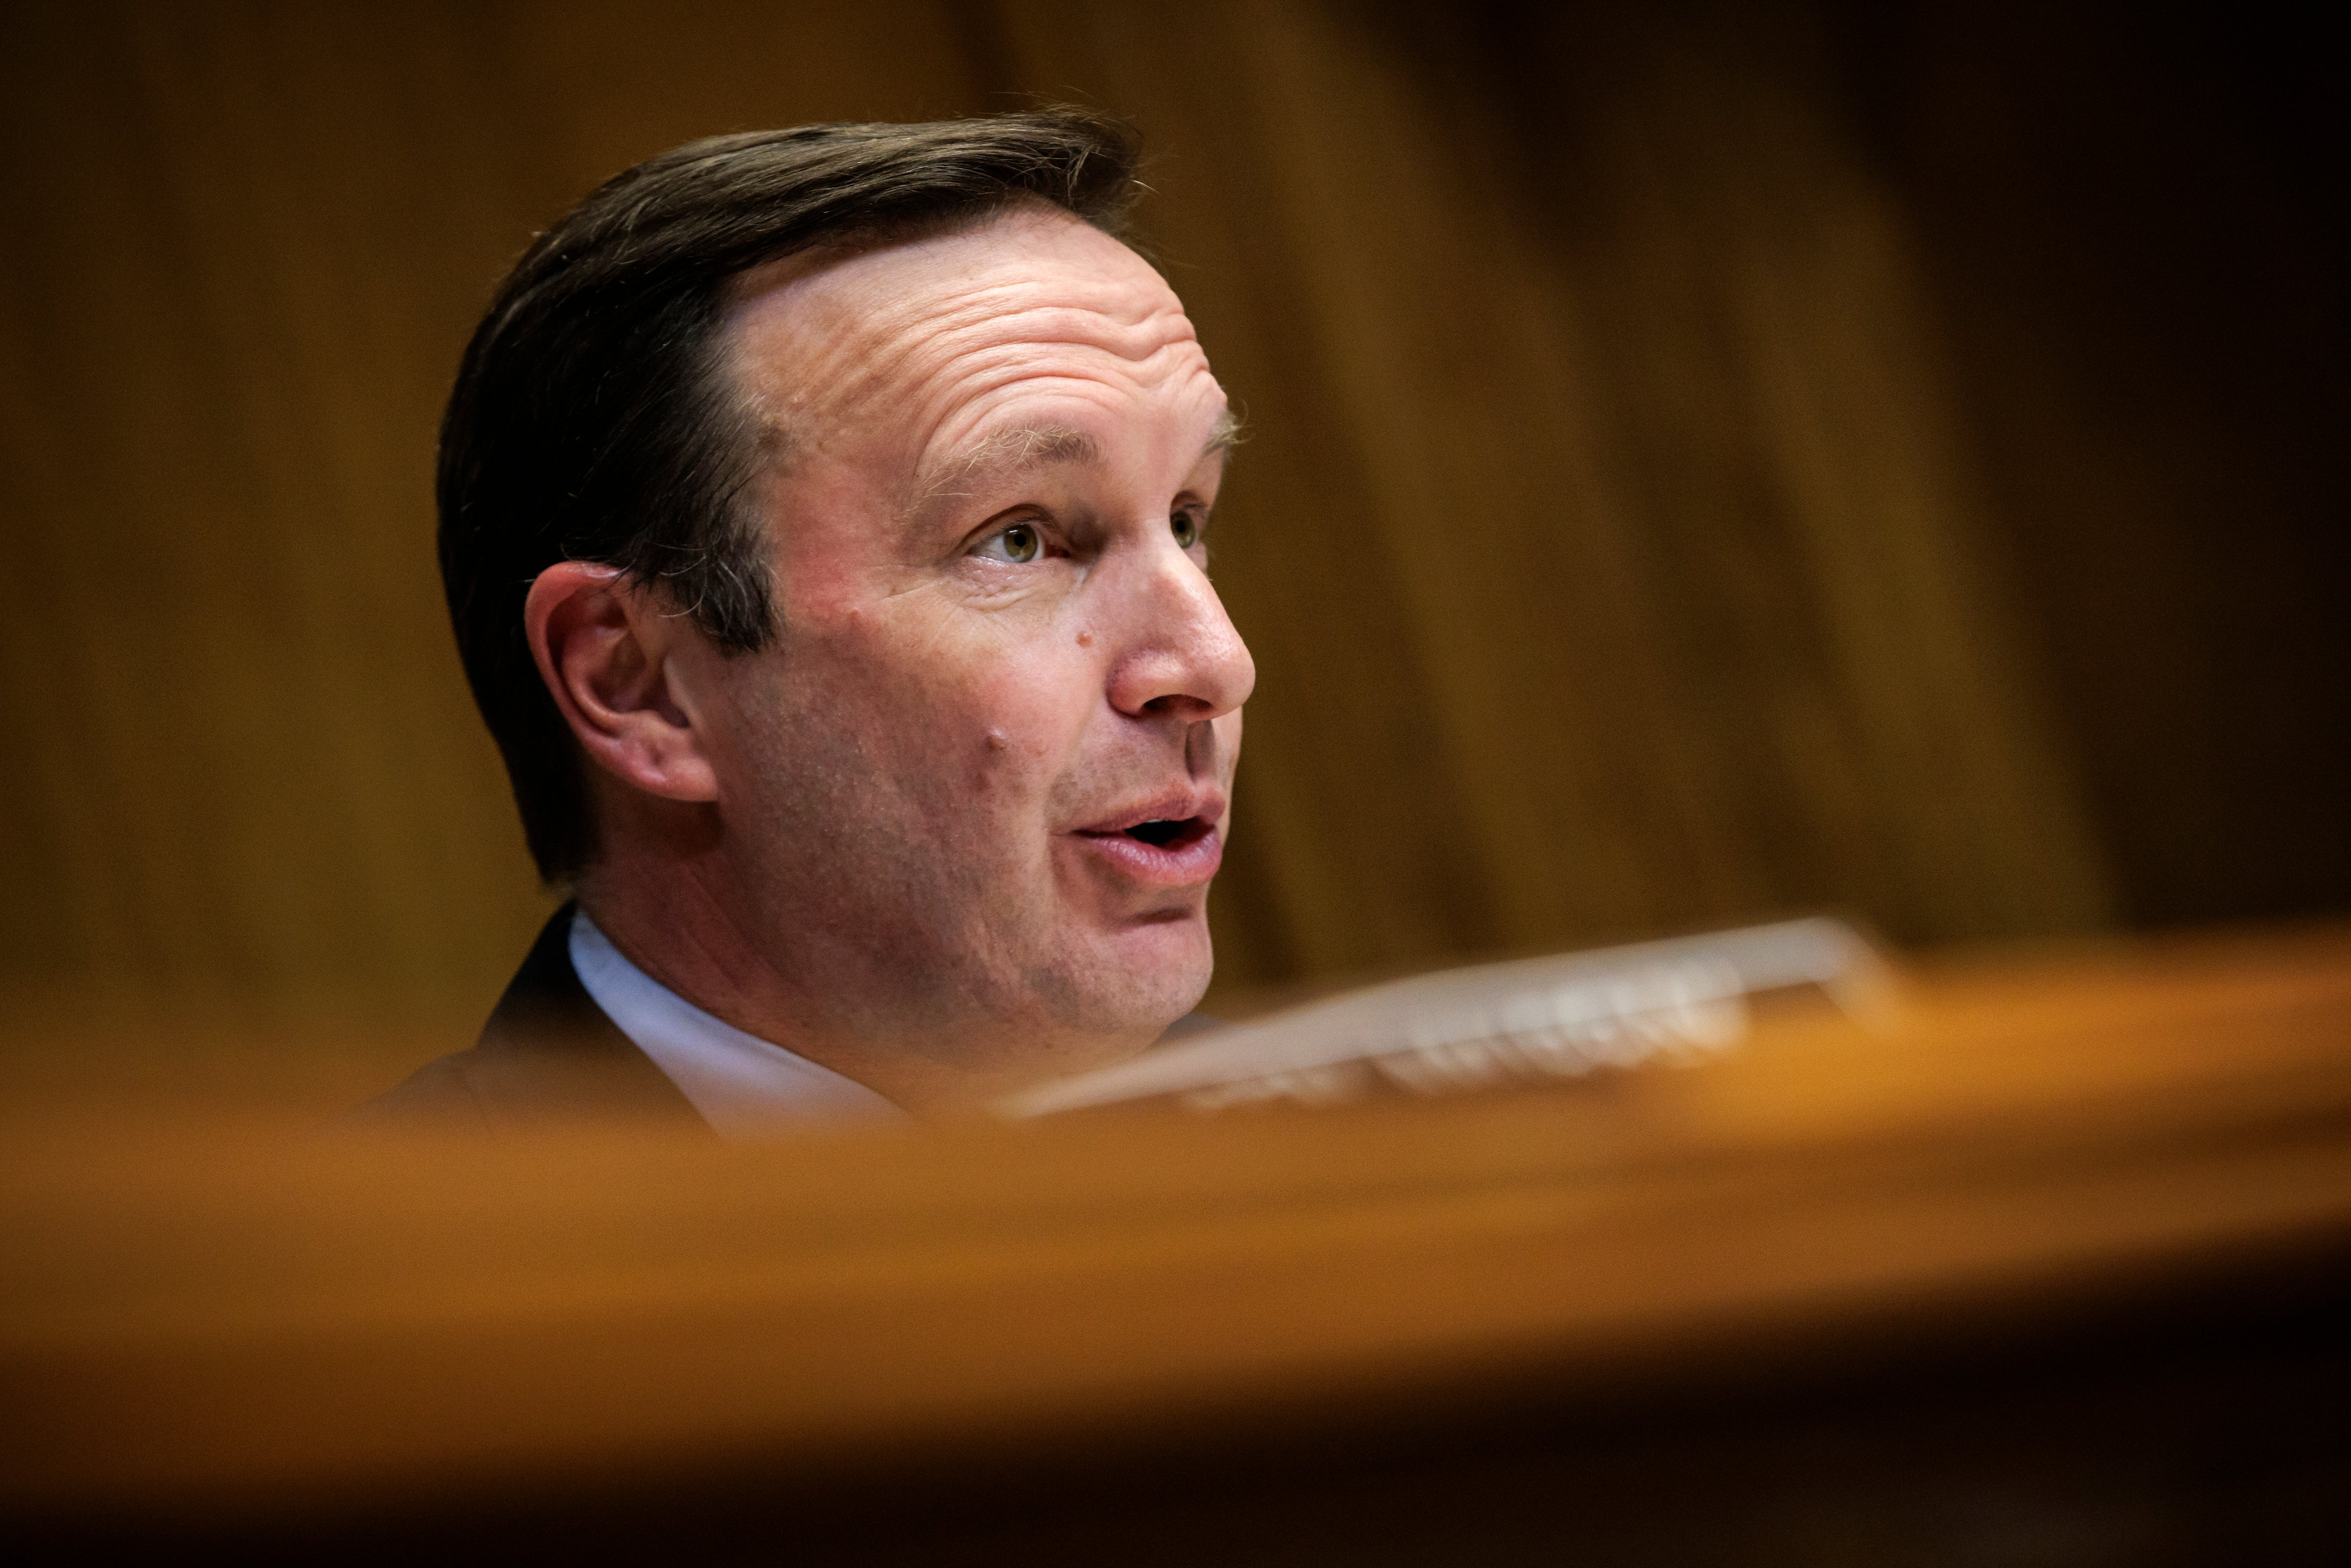 Senator Chris Murphy is pictured during a committee hearing. He called the Supreme court “brazenly corrupt” in a recent interview.